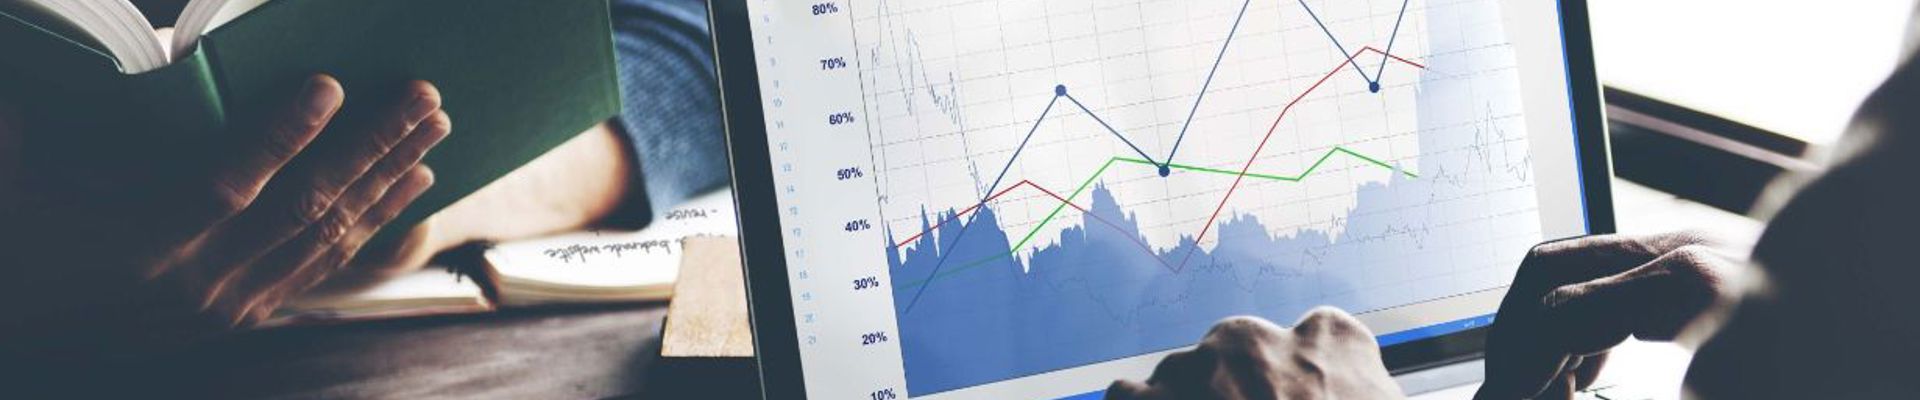 Top 7 tips for better financial forecasting